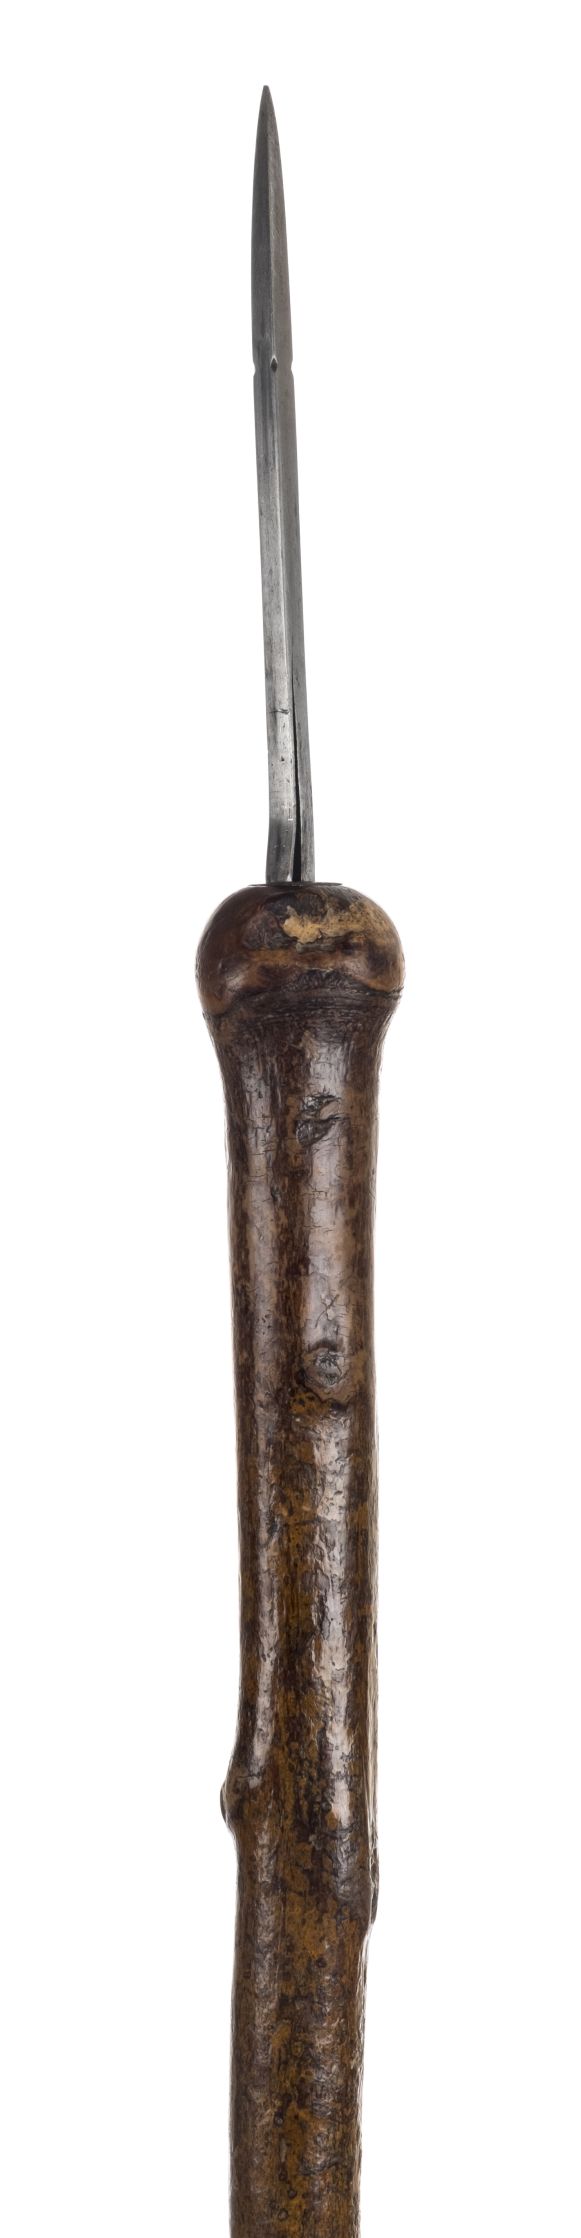 *Walking Stick. 19th century walking stick, with natural shaft and knop concealing a square steel